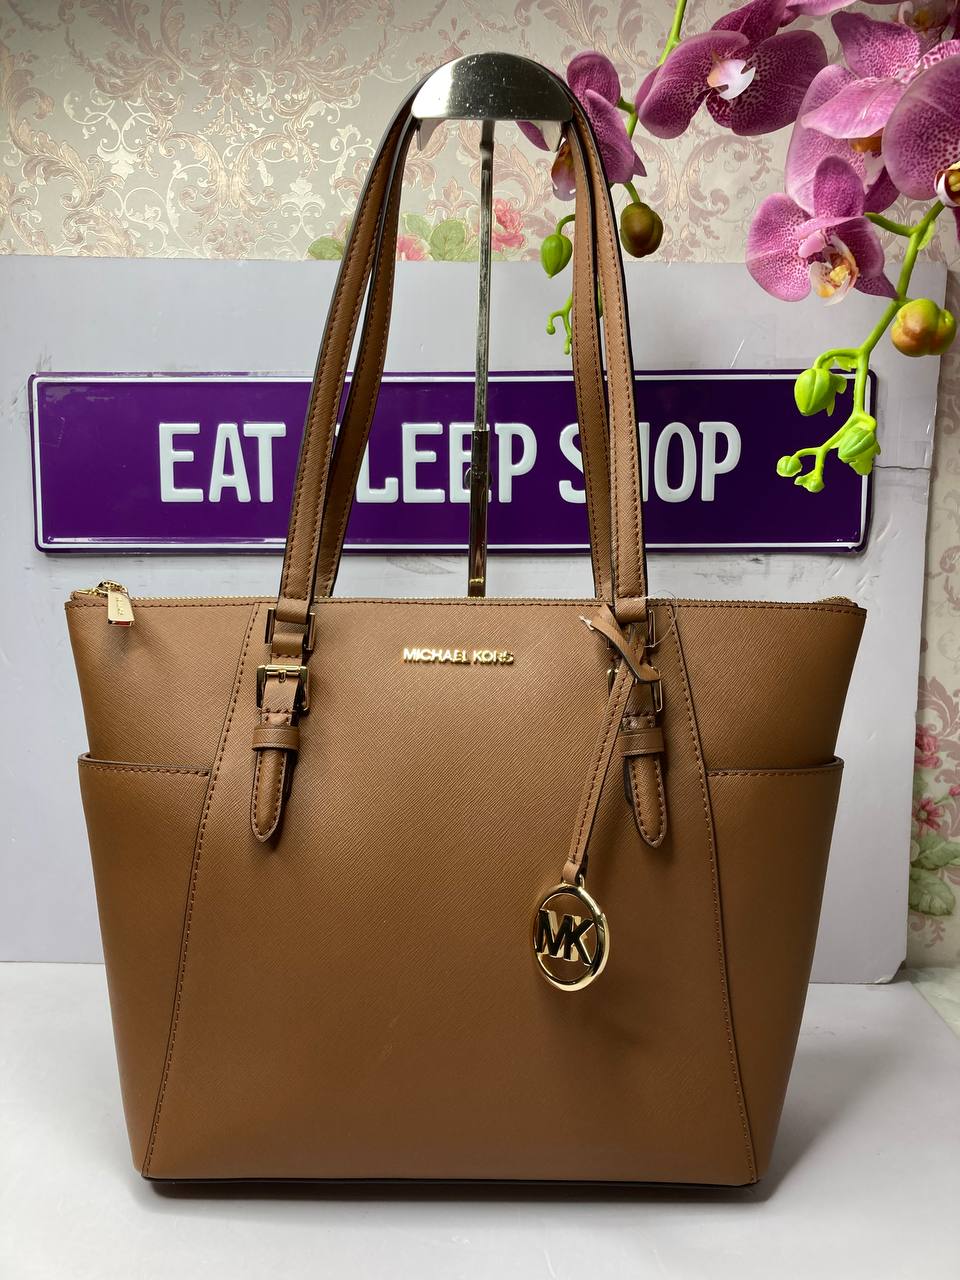 Michael Kors Charlotte Large Saffiano Leather Top-Zip Tote Bag in